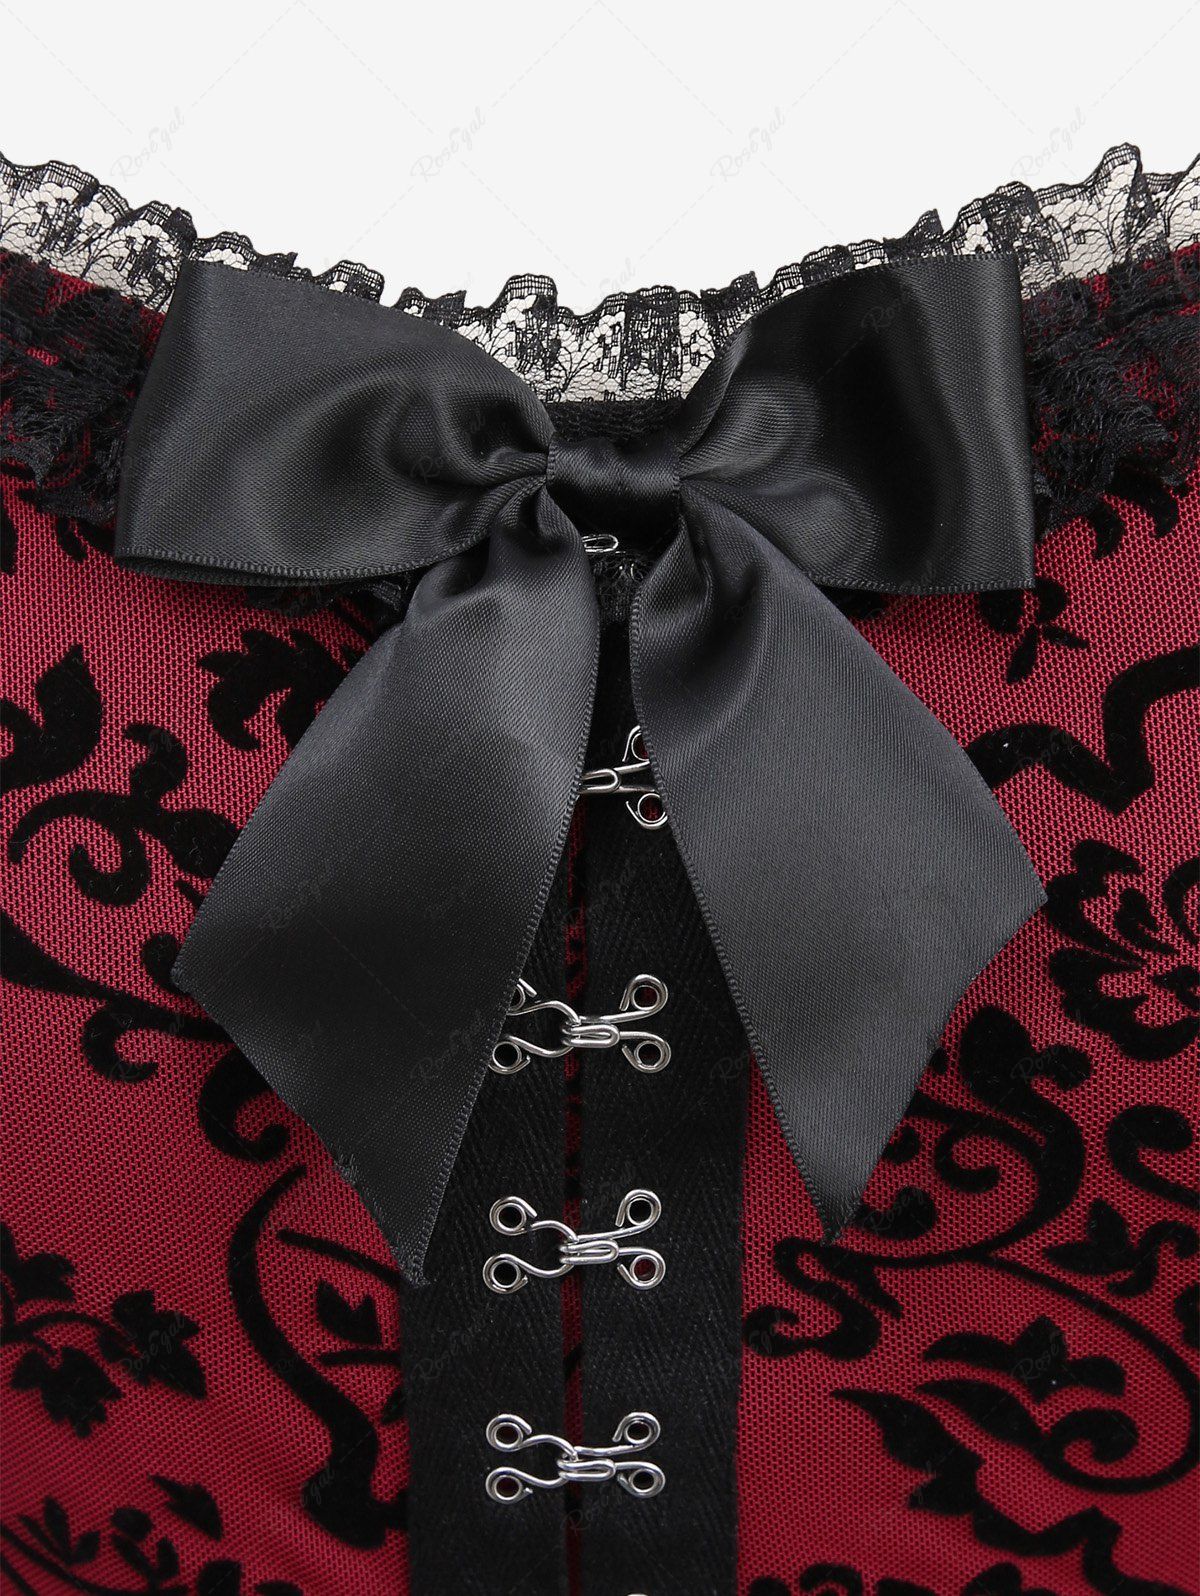 Gothic Floral Mesh Flocking Ruffles Lace Trim Bowknot Hook and Eye Lace-up Back Patchwork Corset